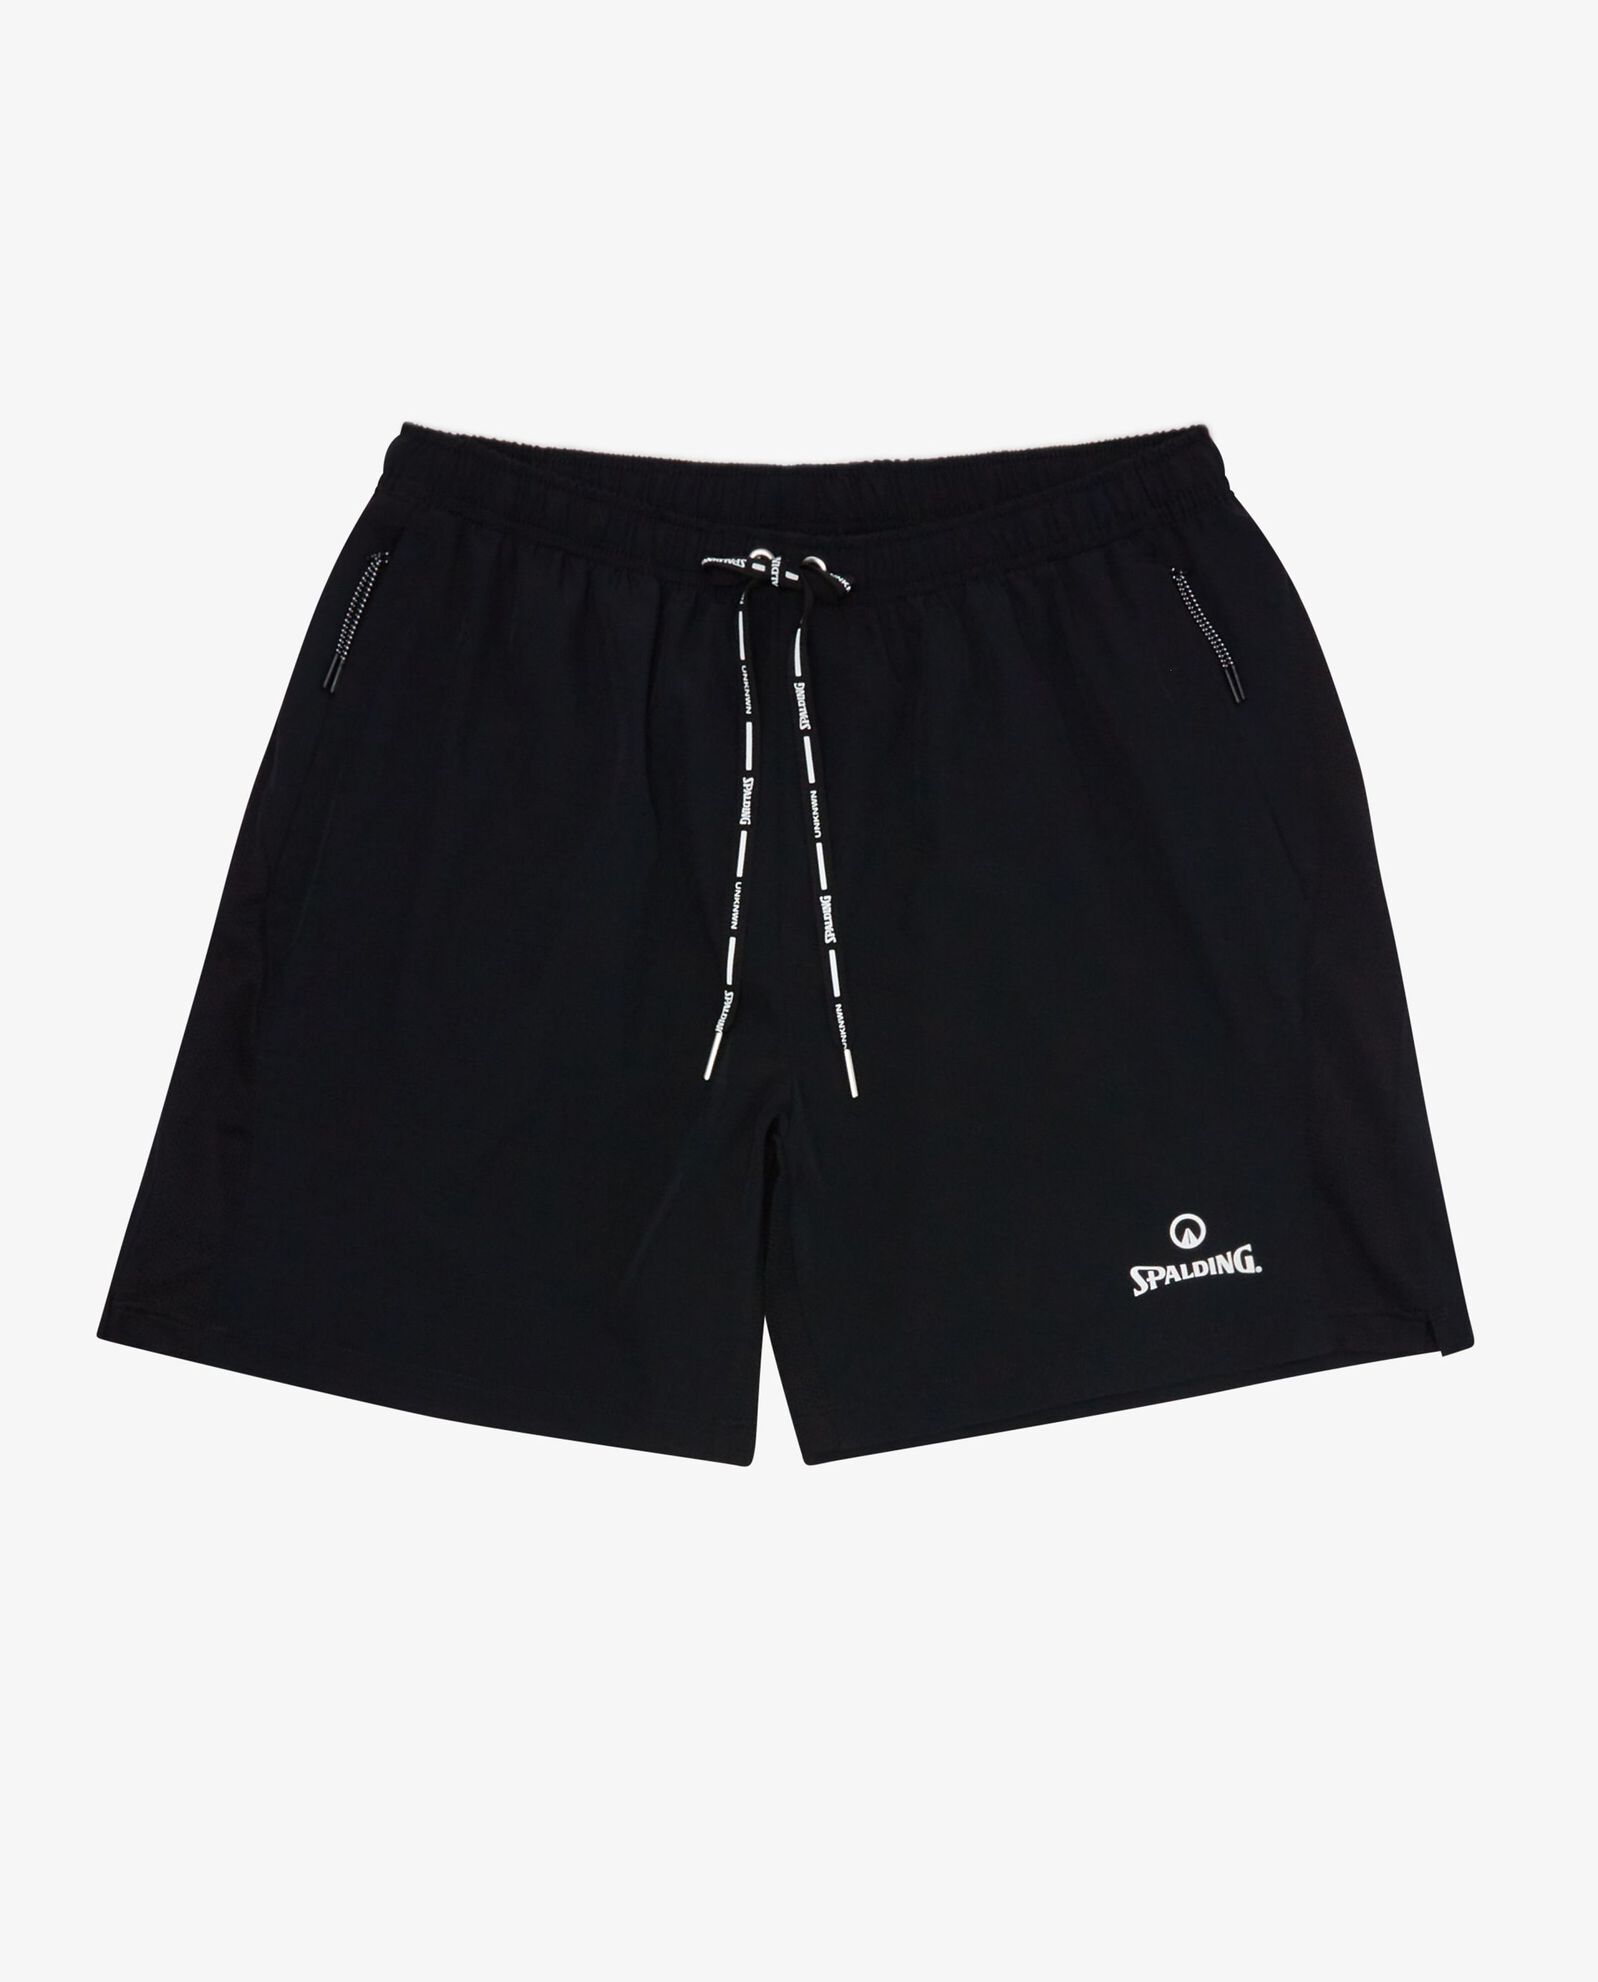 Spalding x UNKNWN Sport Short Anthracite Large 